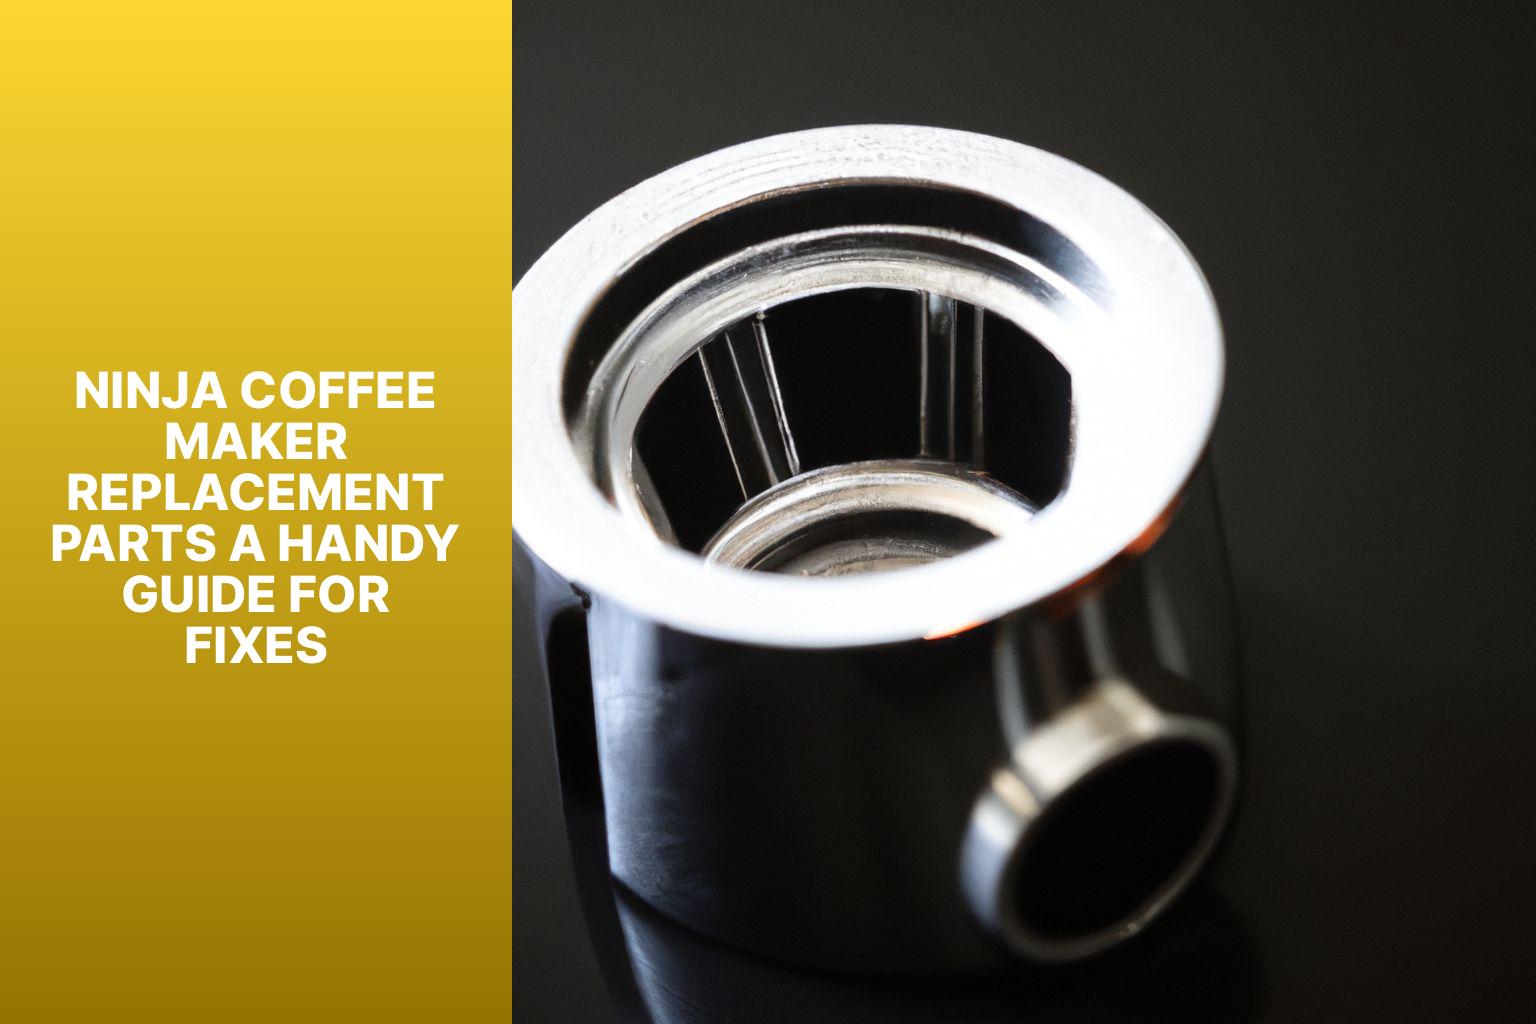 Ninja Coffee Maker Replacement Parts: A Handy Guide for Fixes